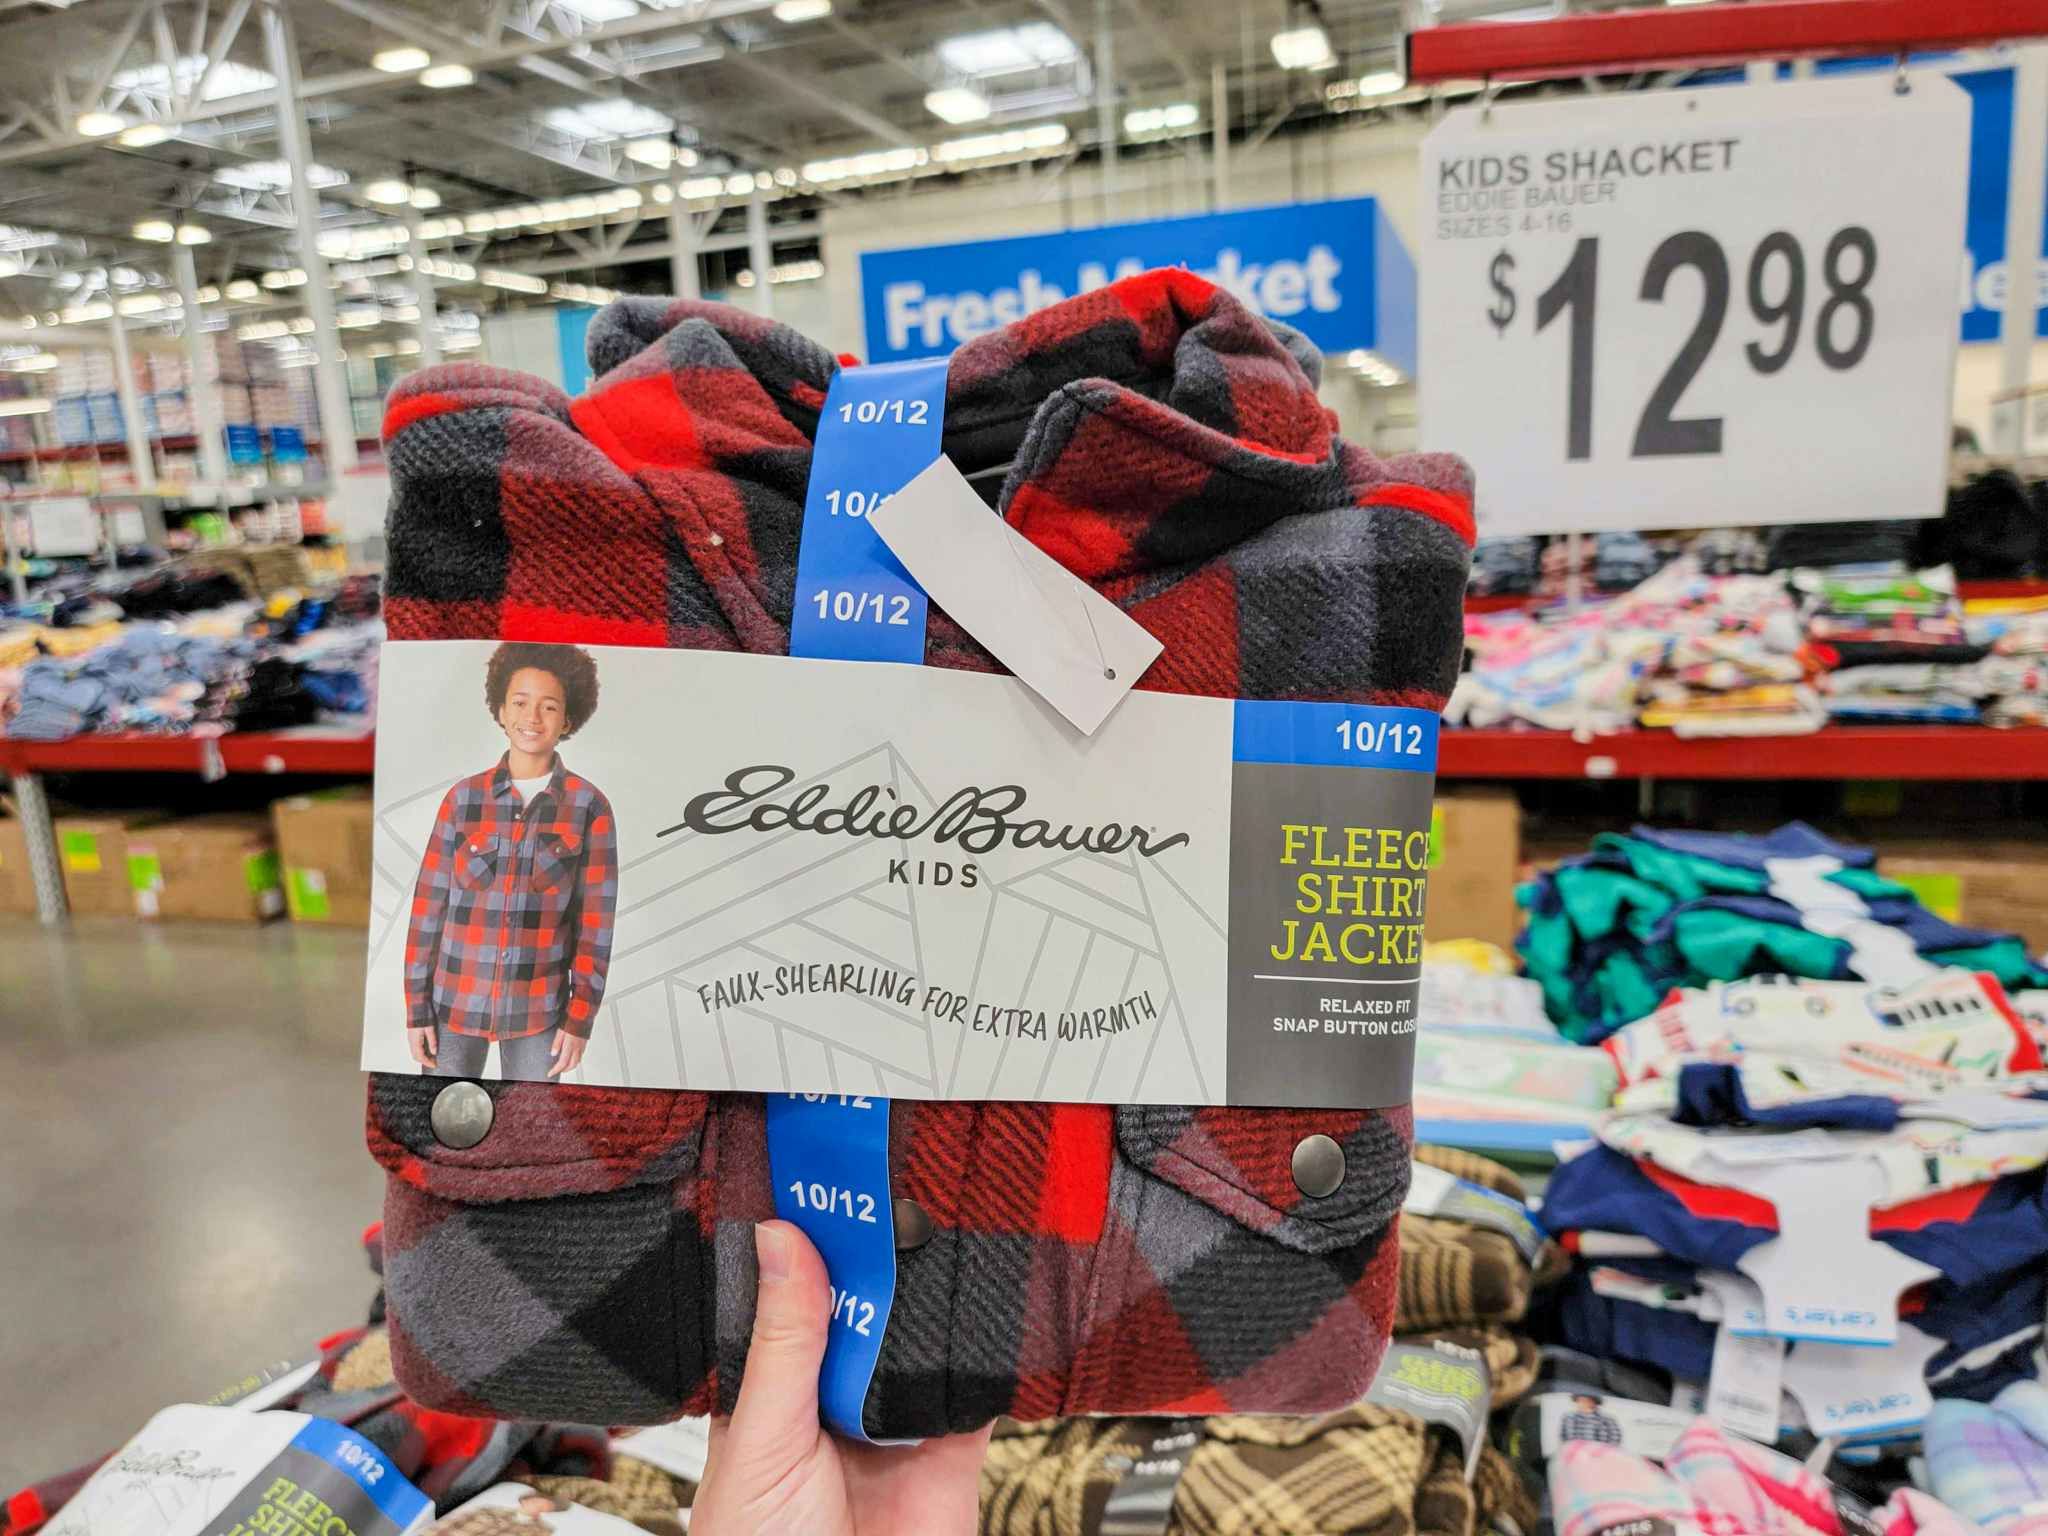 hand holding a red & grey buffalo plaid kids eddie bauer shacket by the price sign for 12.98